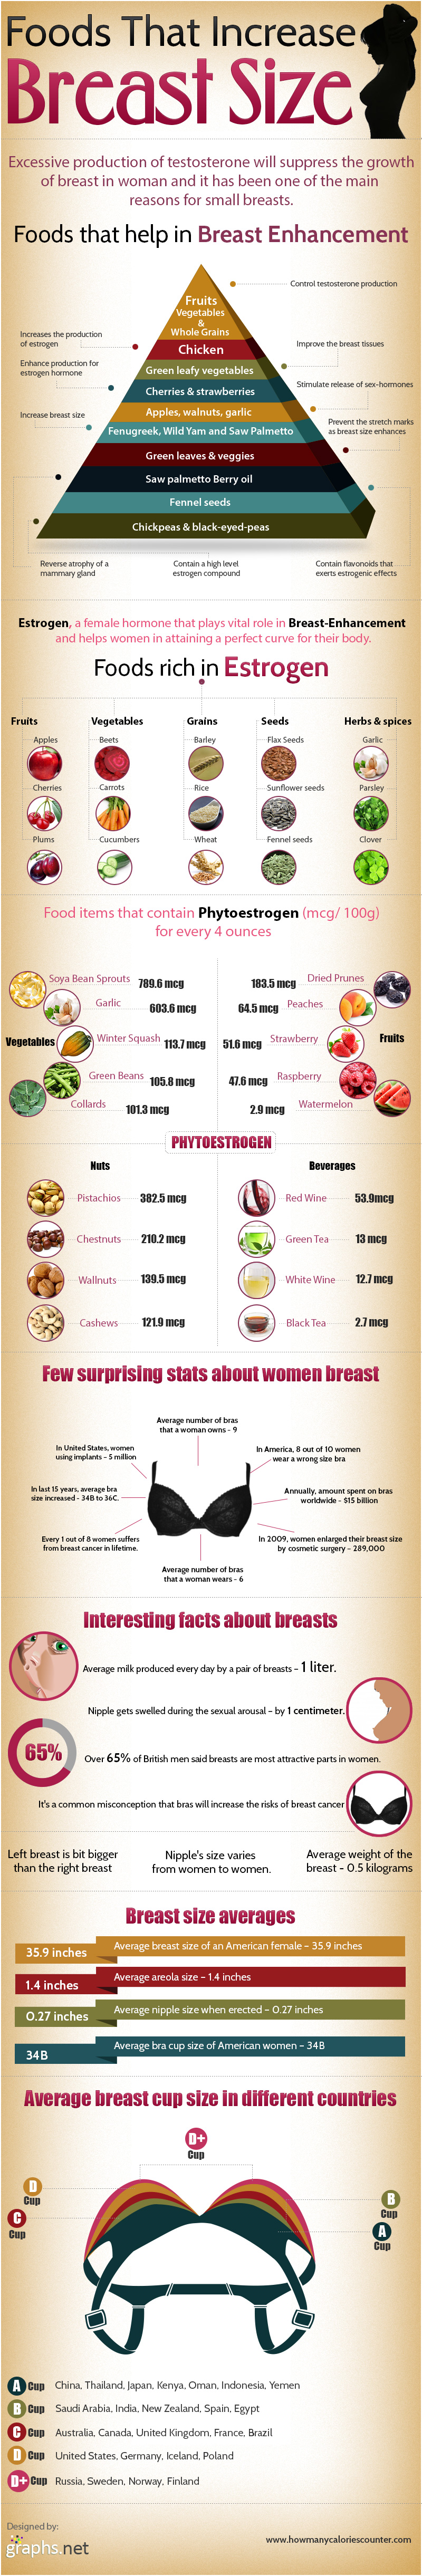 Foods That Increase Breast Size-6900